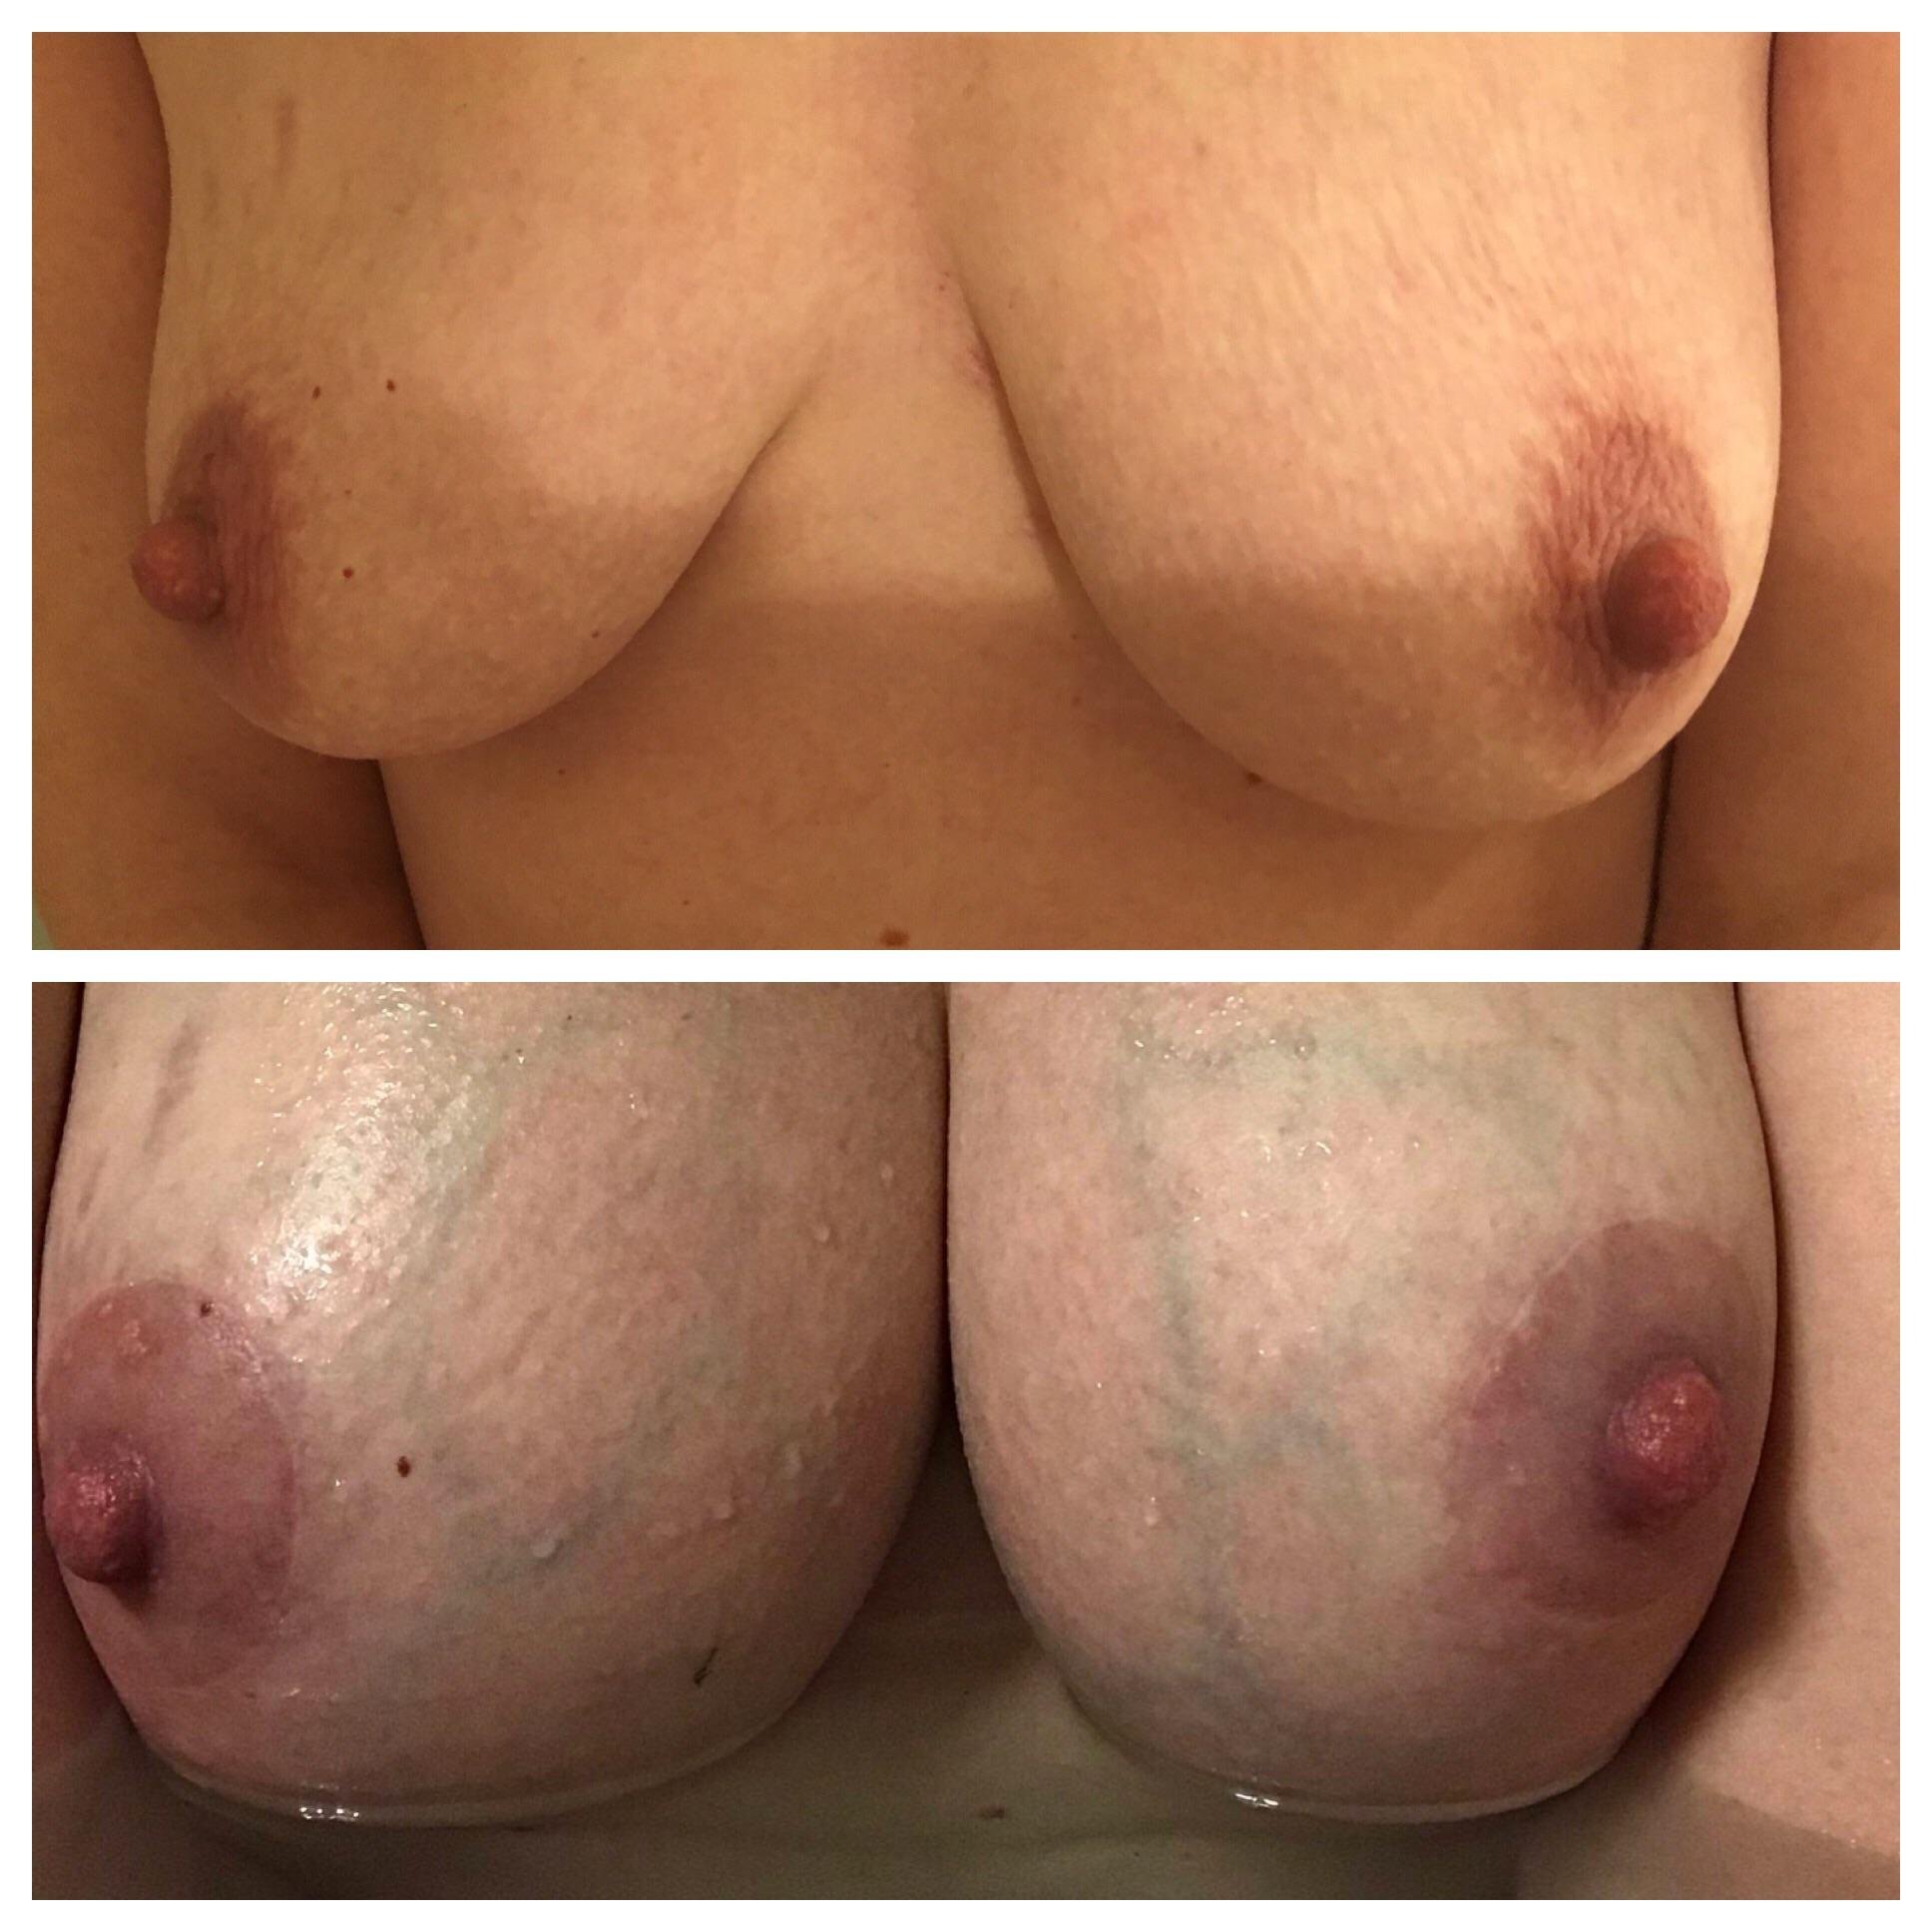 Wife’s boobs before and after. Comments welcome!